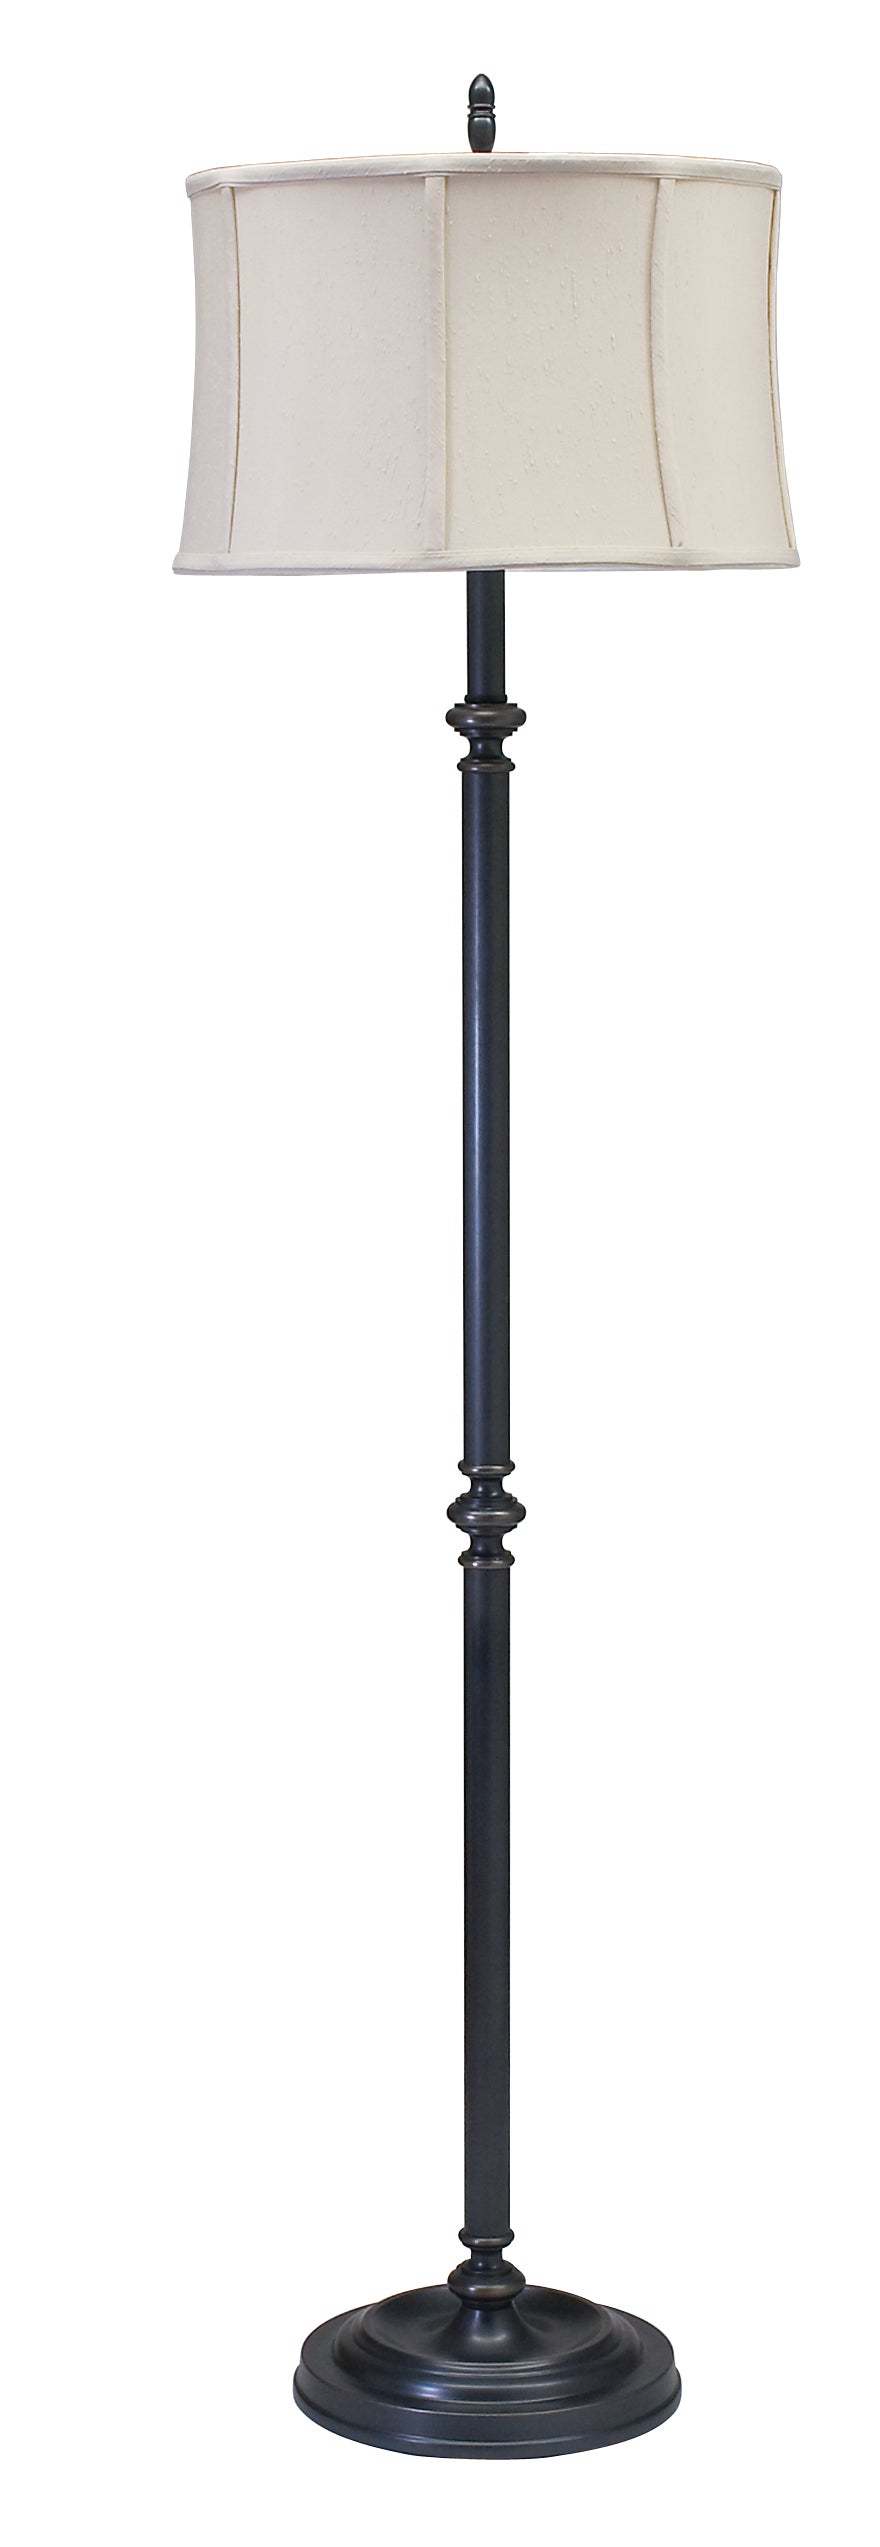 House of Troy Coach 61" Oil Rubbed Bronze Floor Lamp CH800-OB